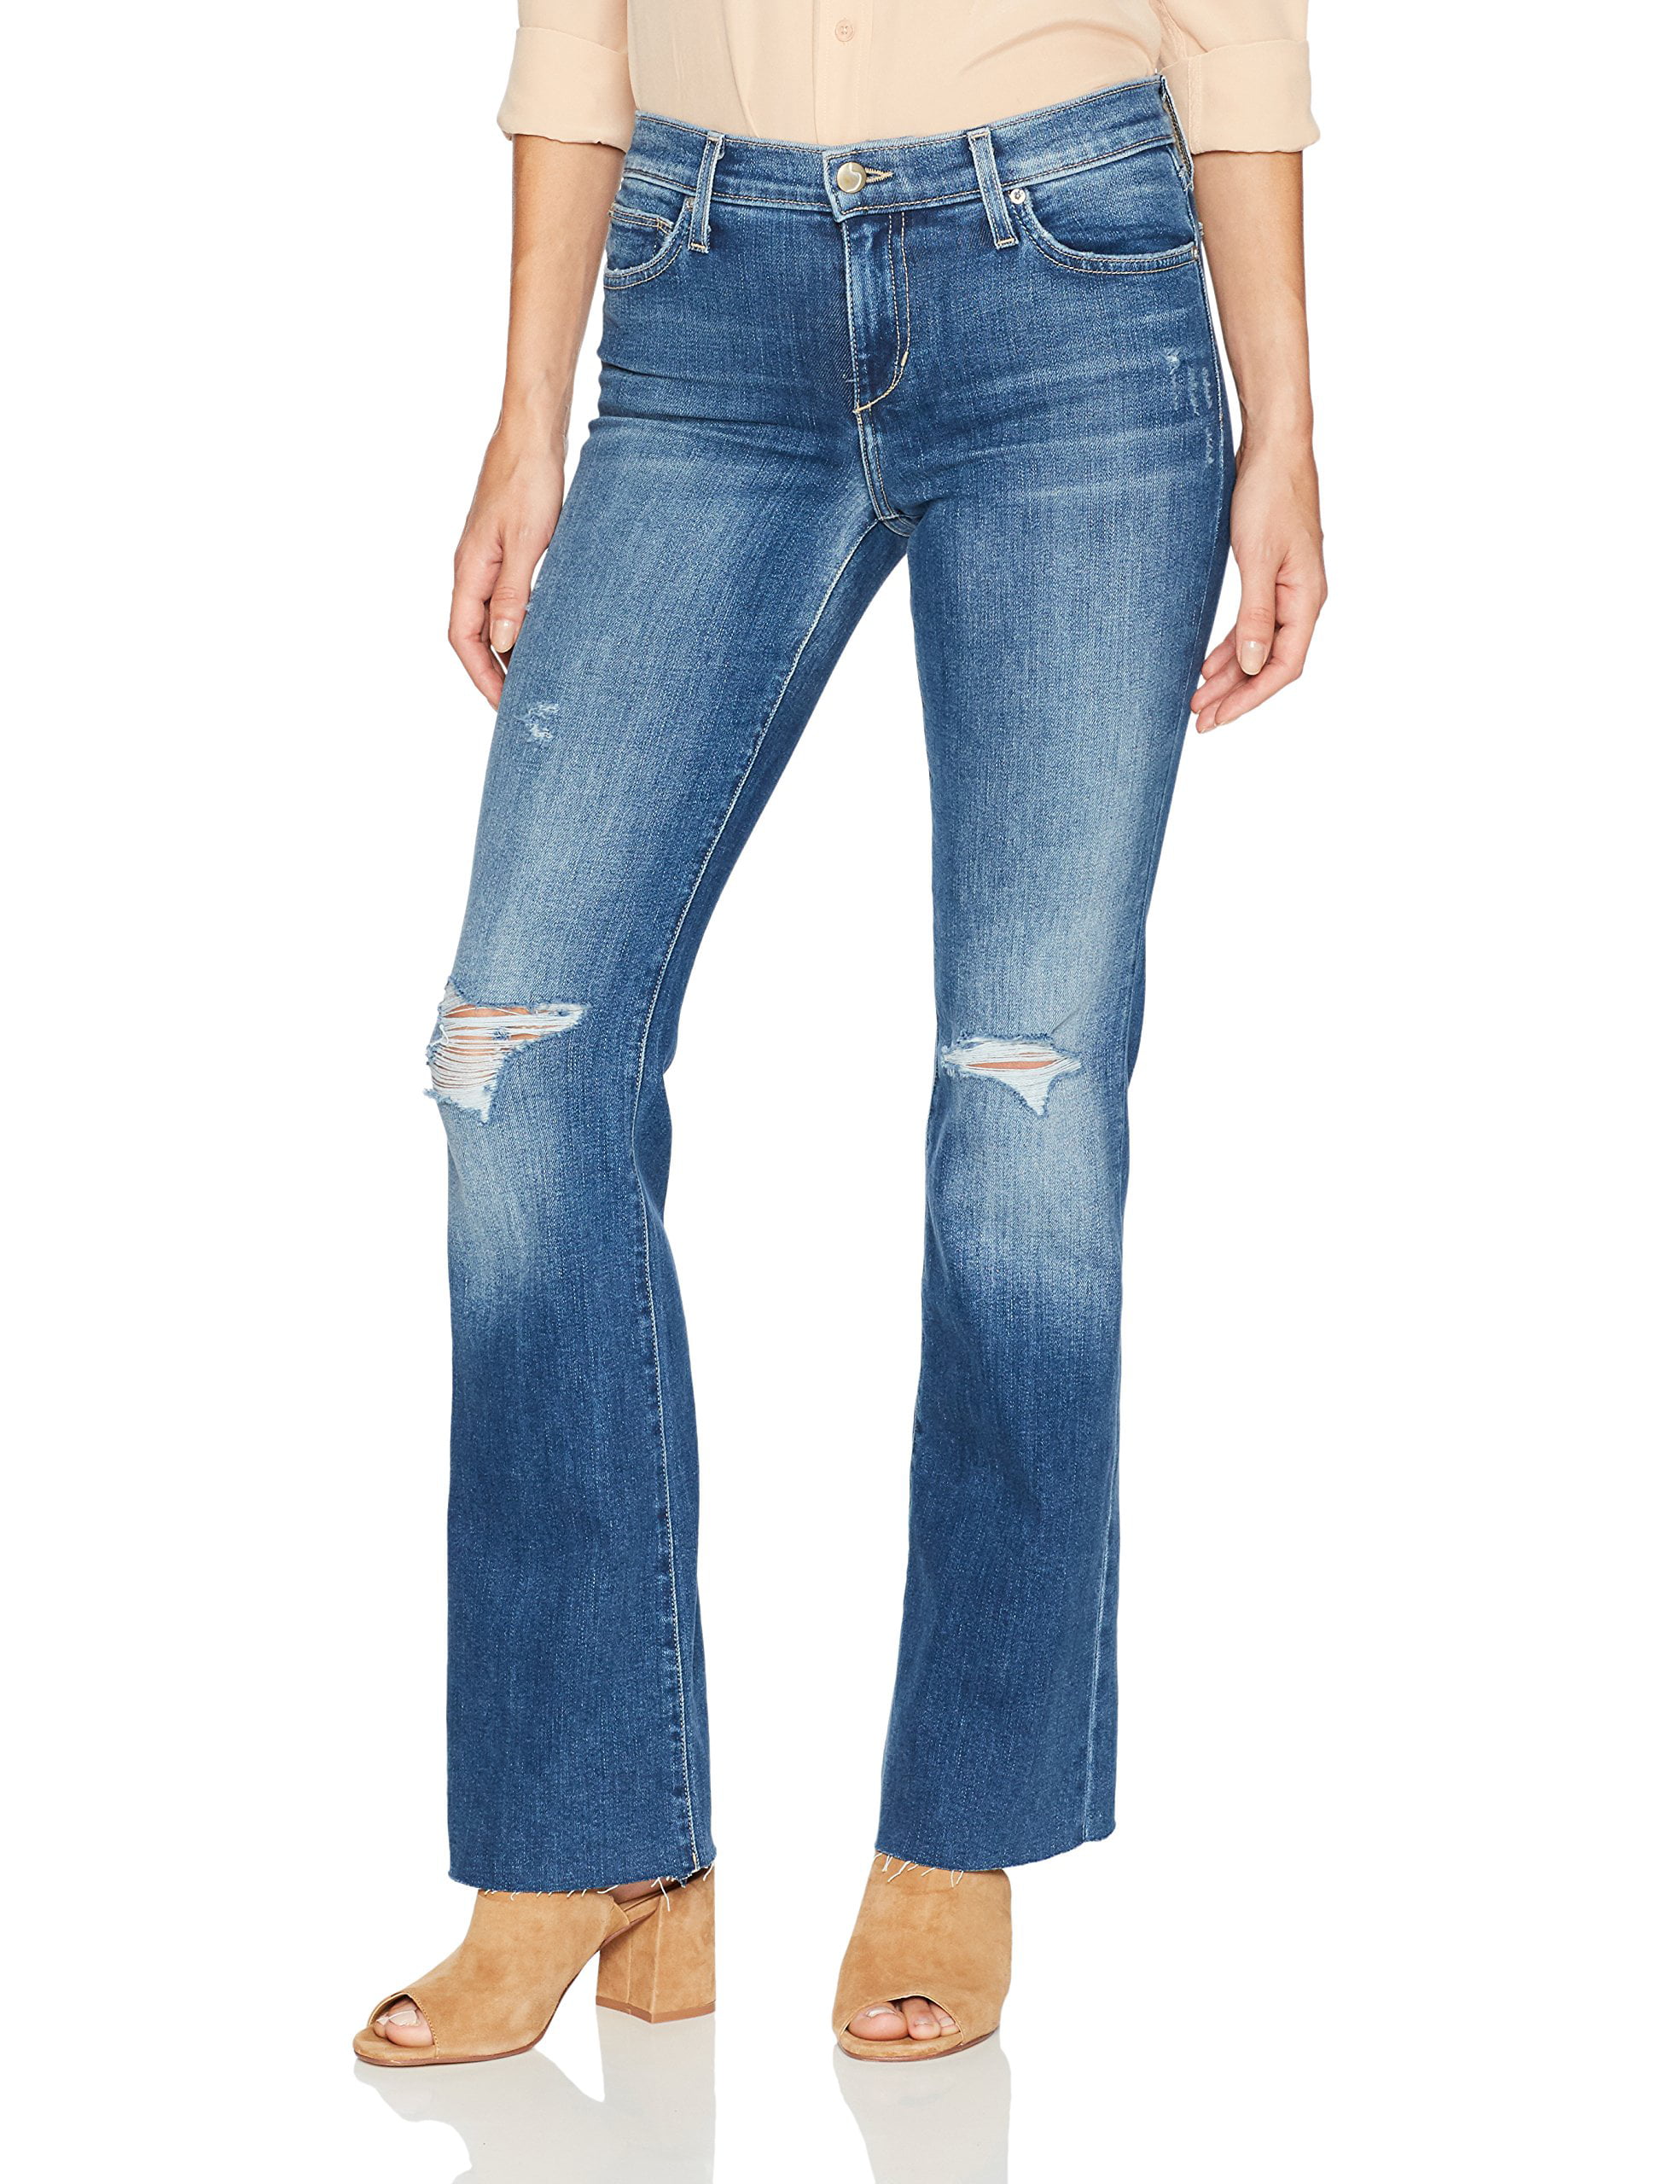 JOE'S Jeans - Womens Provocateur Bootcut Jeans Ripped Knee Frayed 24 ...